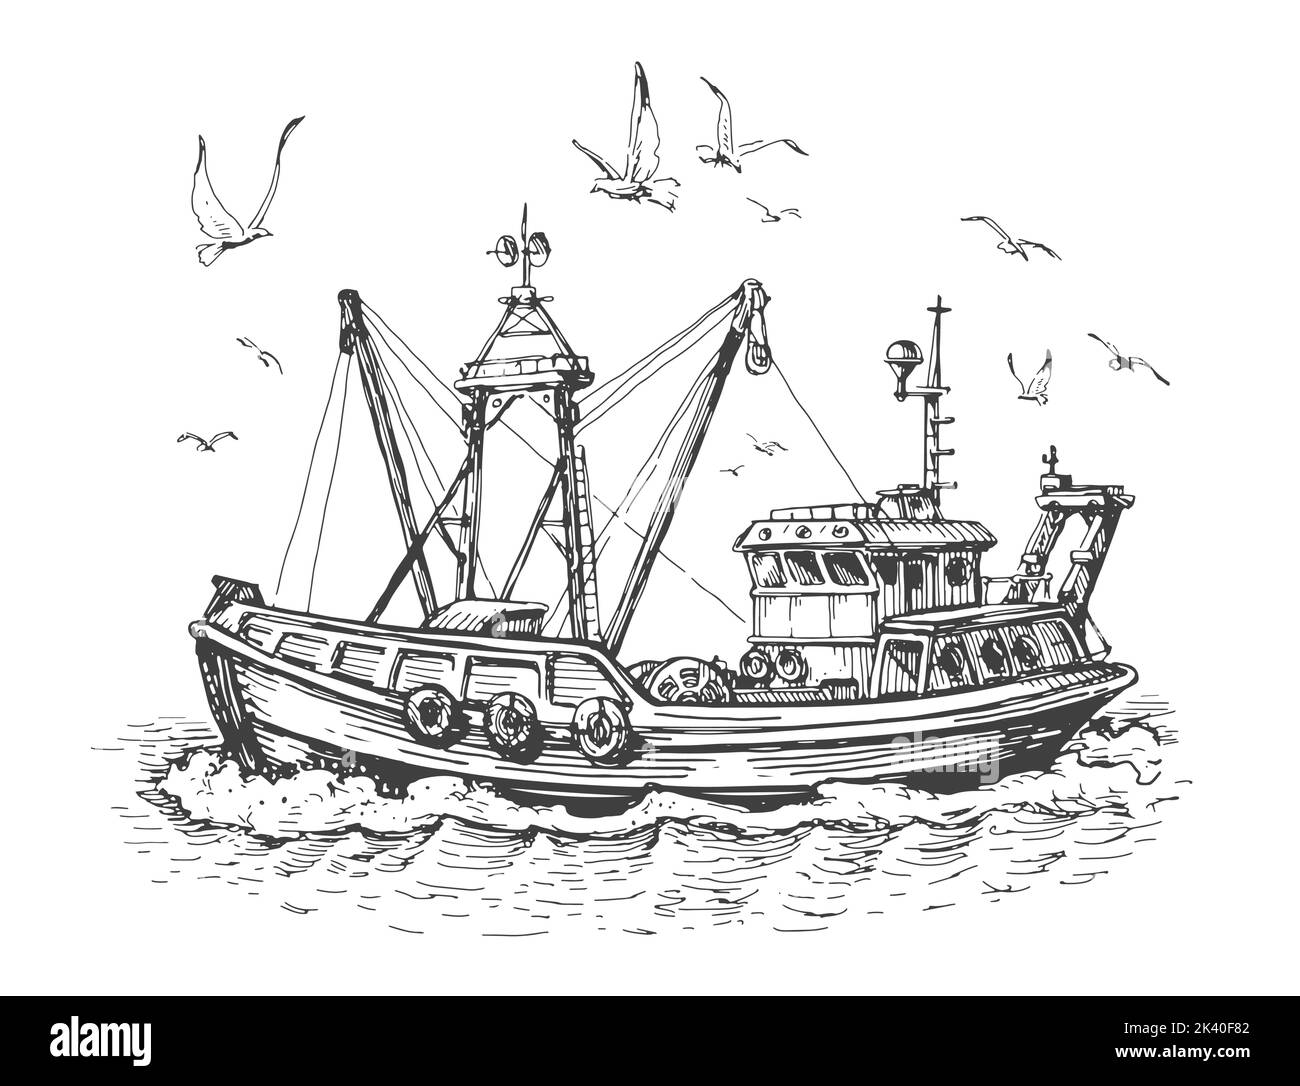 Fishing boat in sea. Seagulls and vessel, ship on the water. Seascape, fishery sketch vector illustration Stock Vector